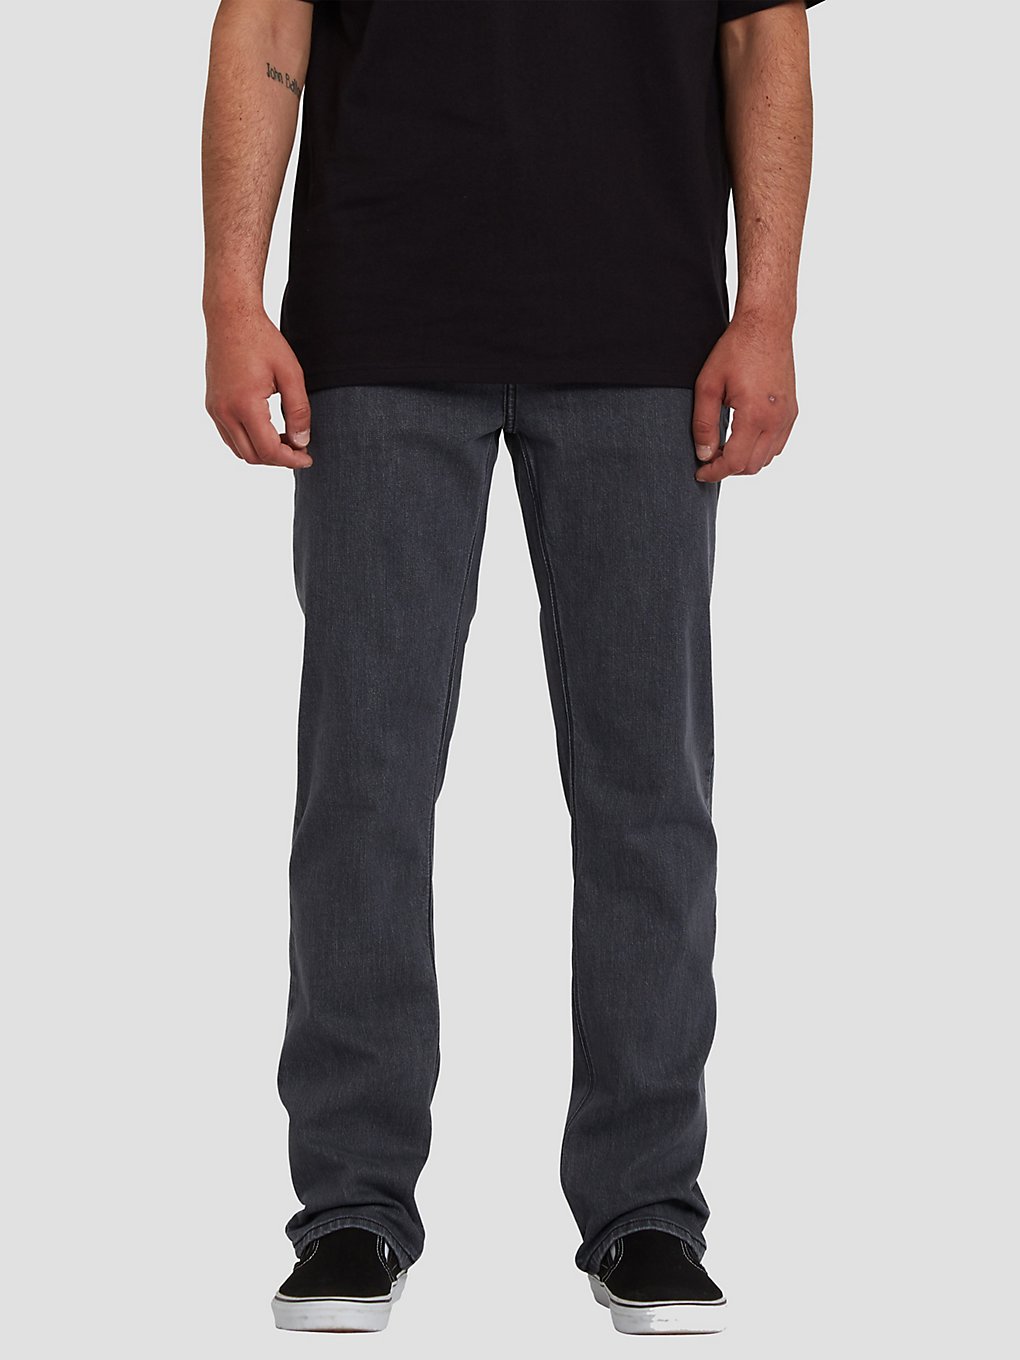 Volcom Solver Jeans easy enzyme grey